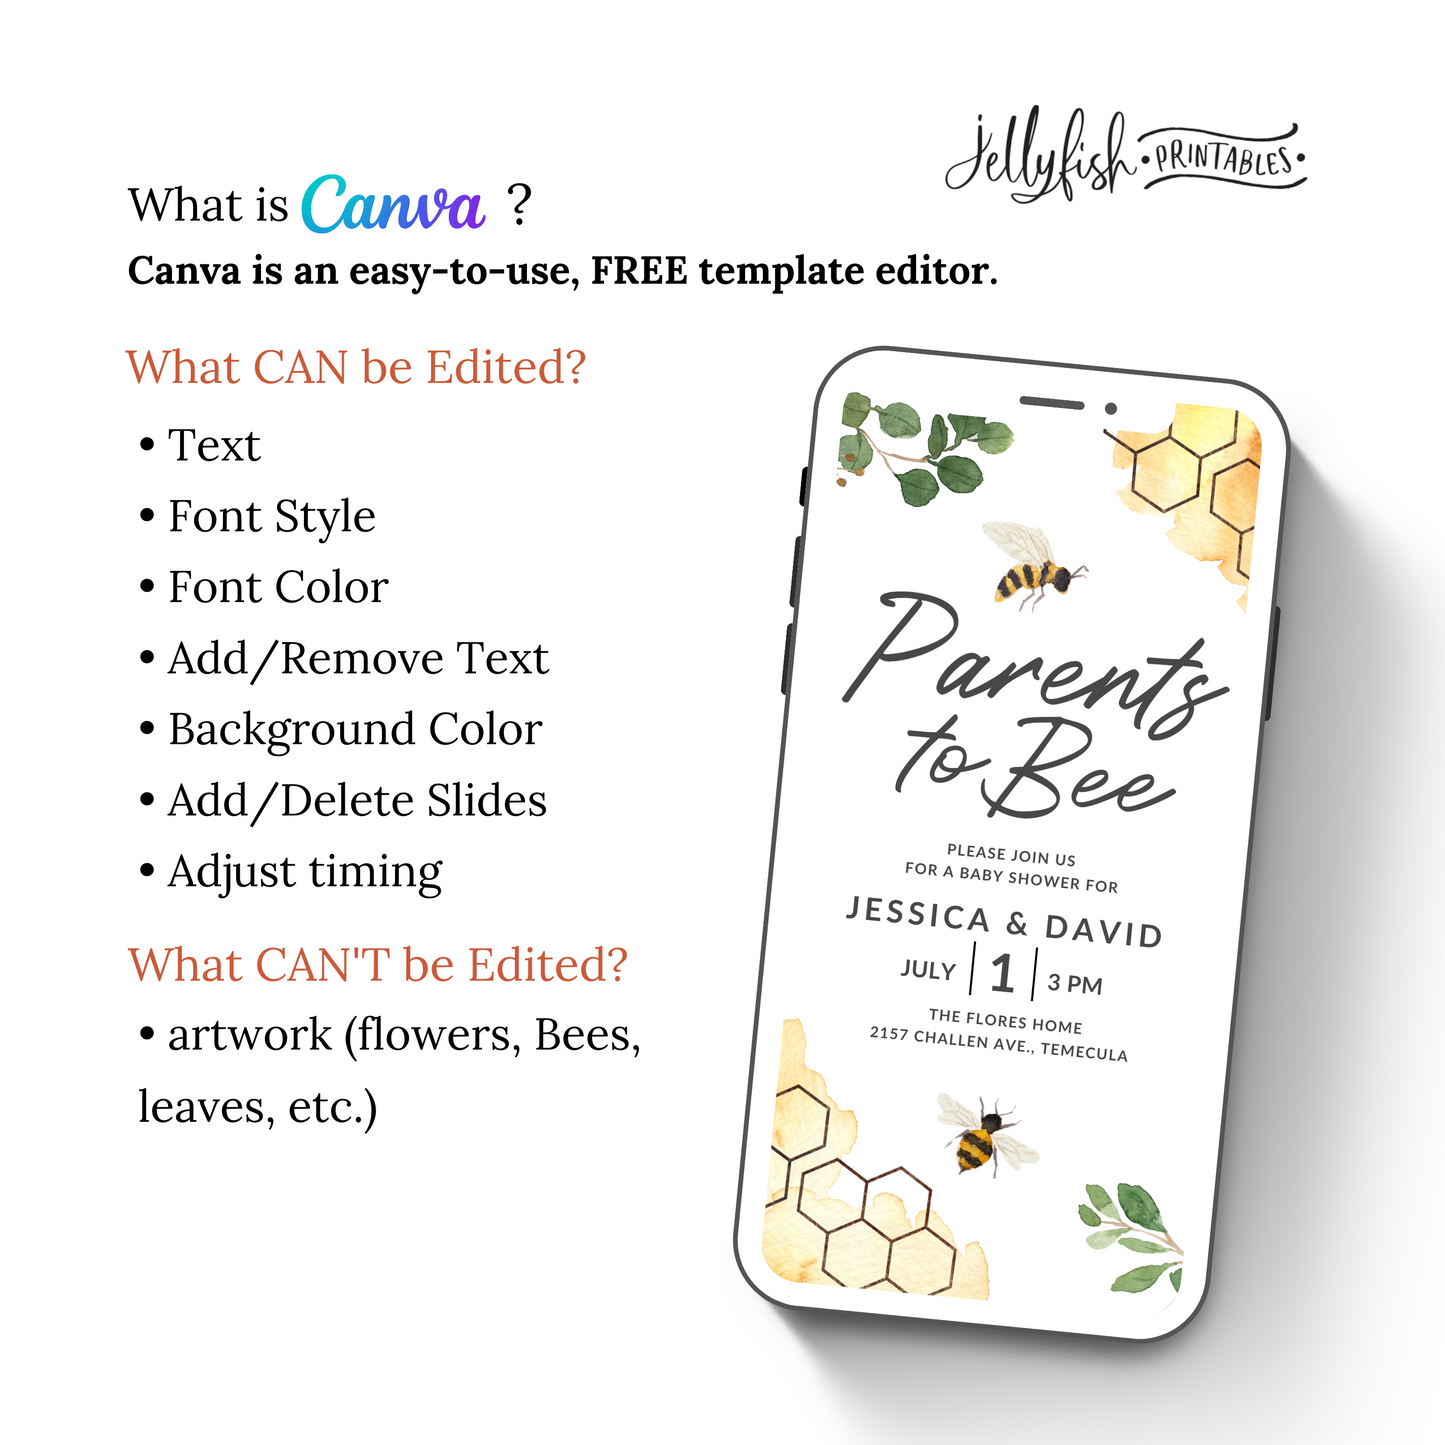 Parents To BEE Baby Shower Video Invitation Canva Template. Send Today!